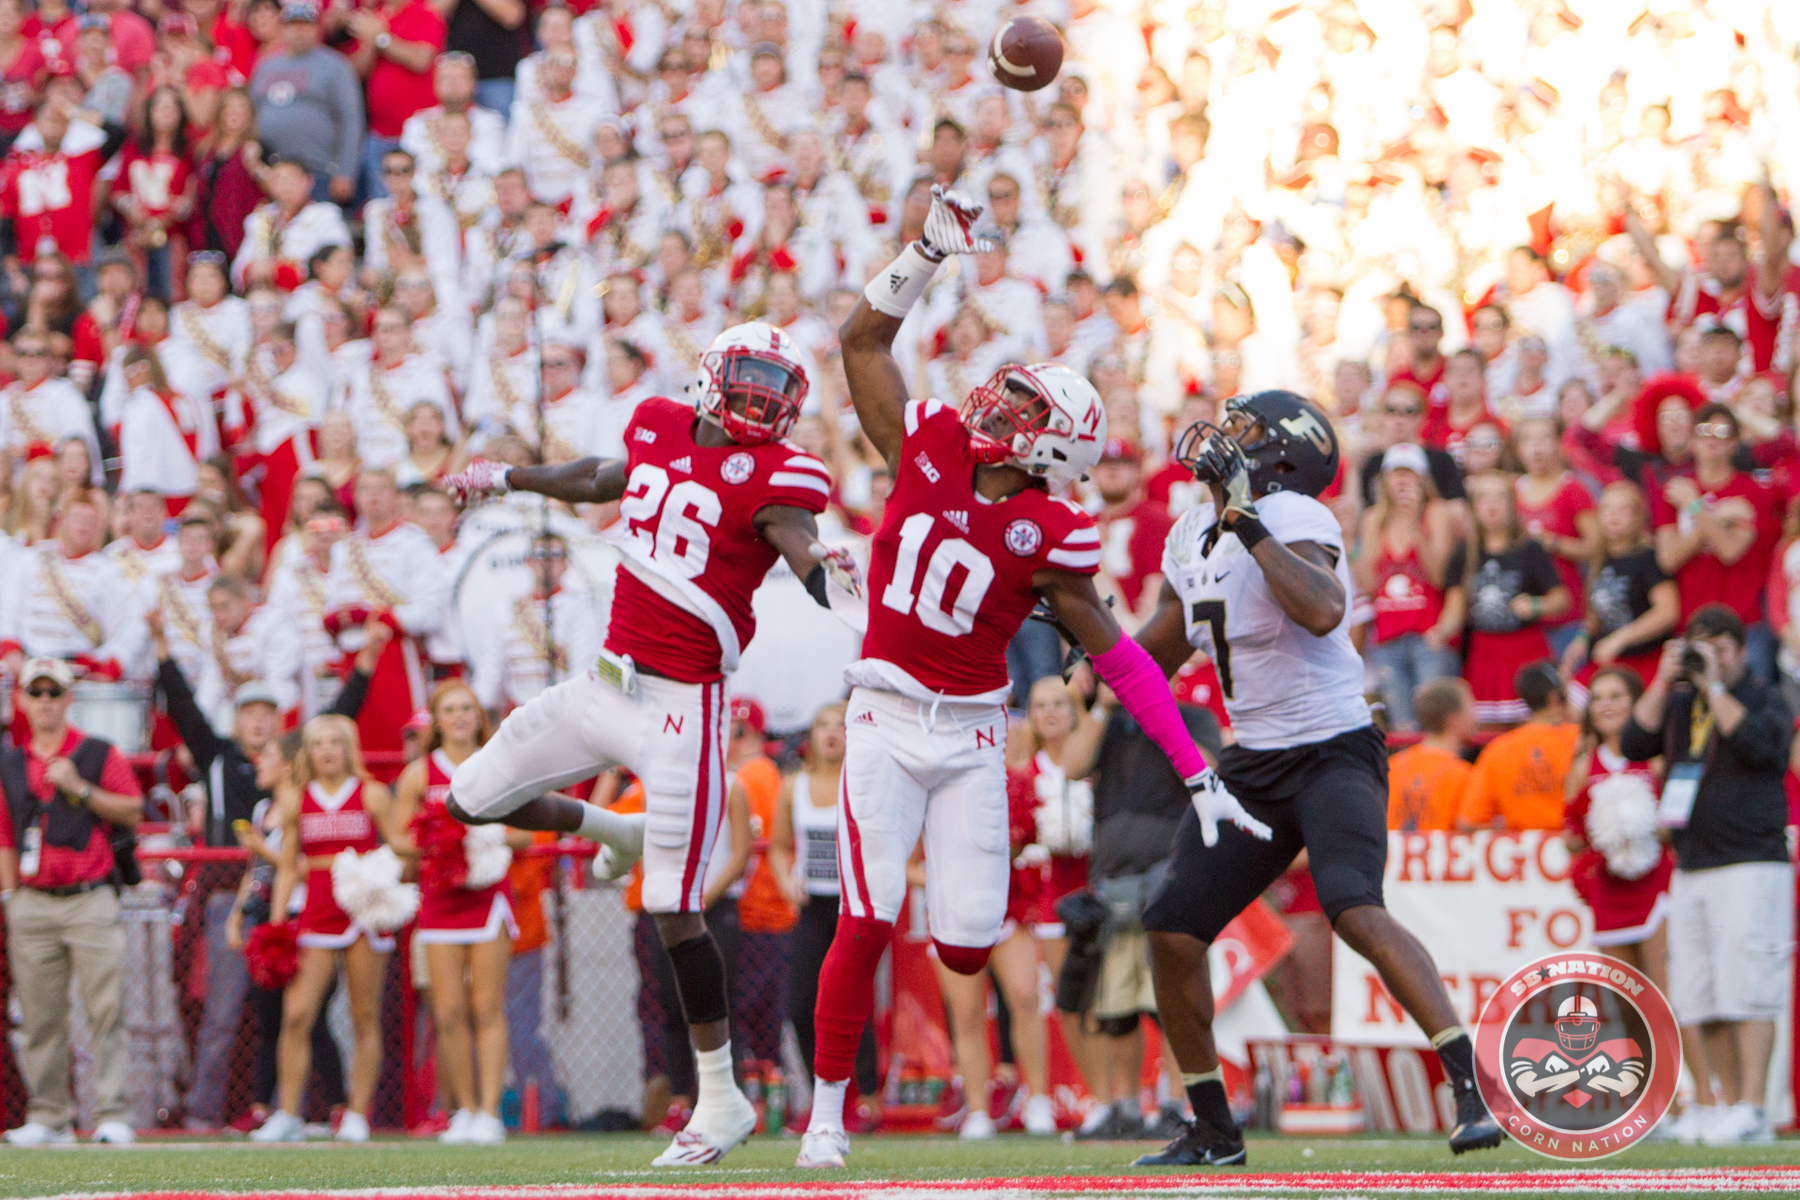 Gallery: Huskers March on to 7-0